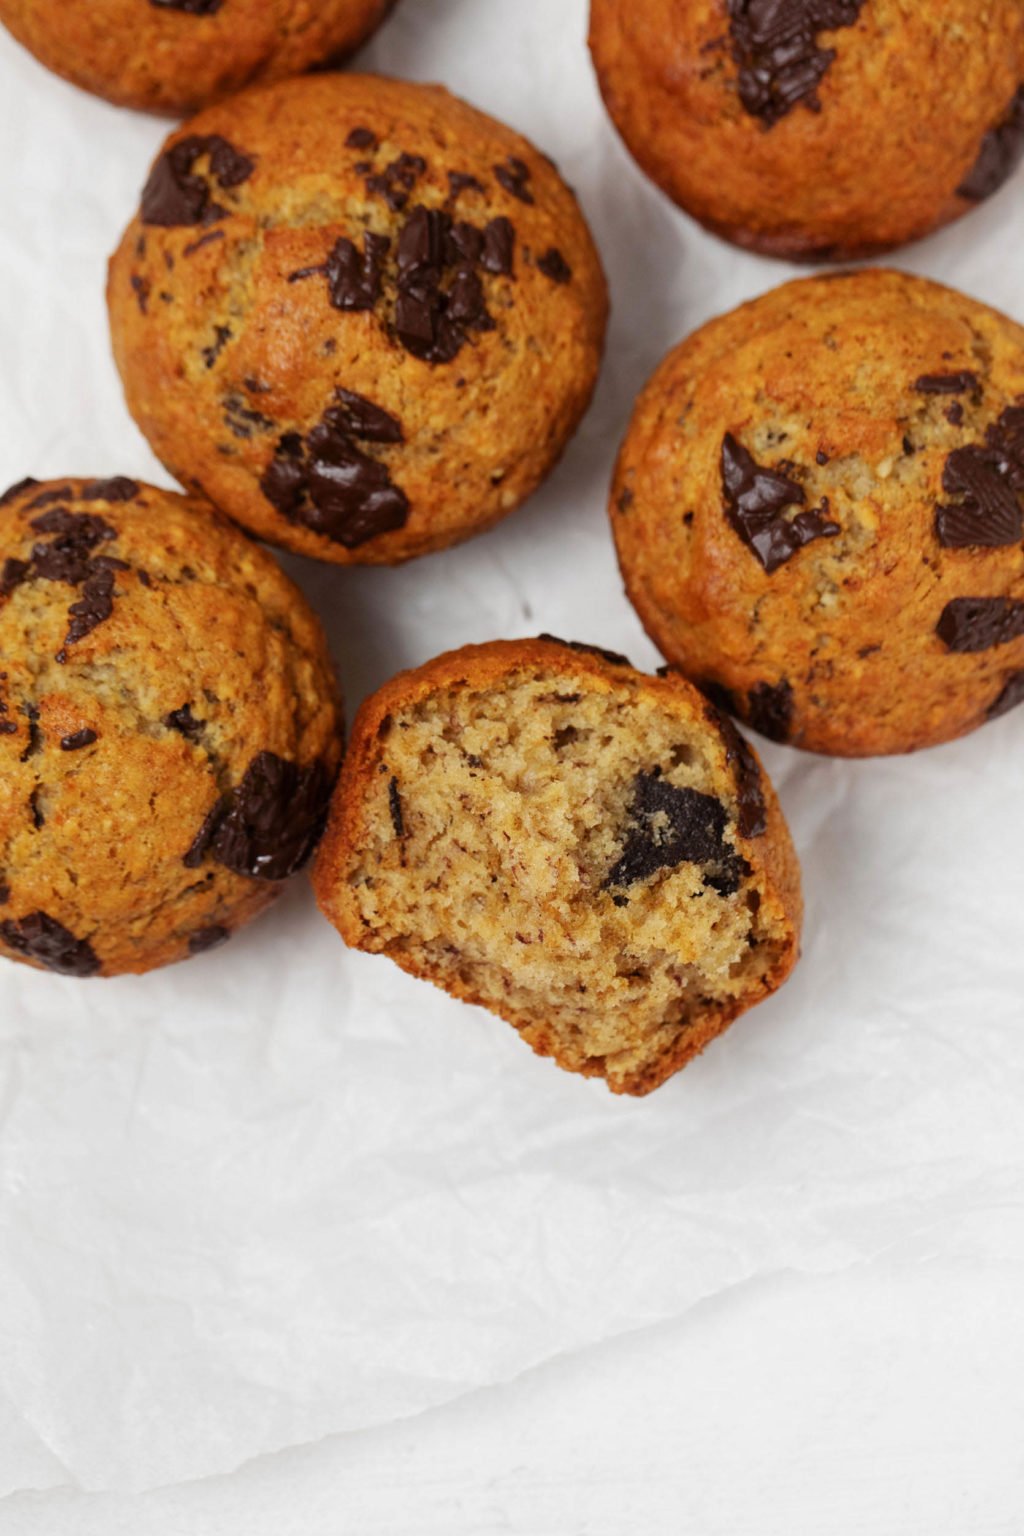 Freshly baked vegan banana chocolate chip muffins are resting on a slice of white parchment paper.